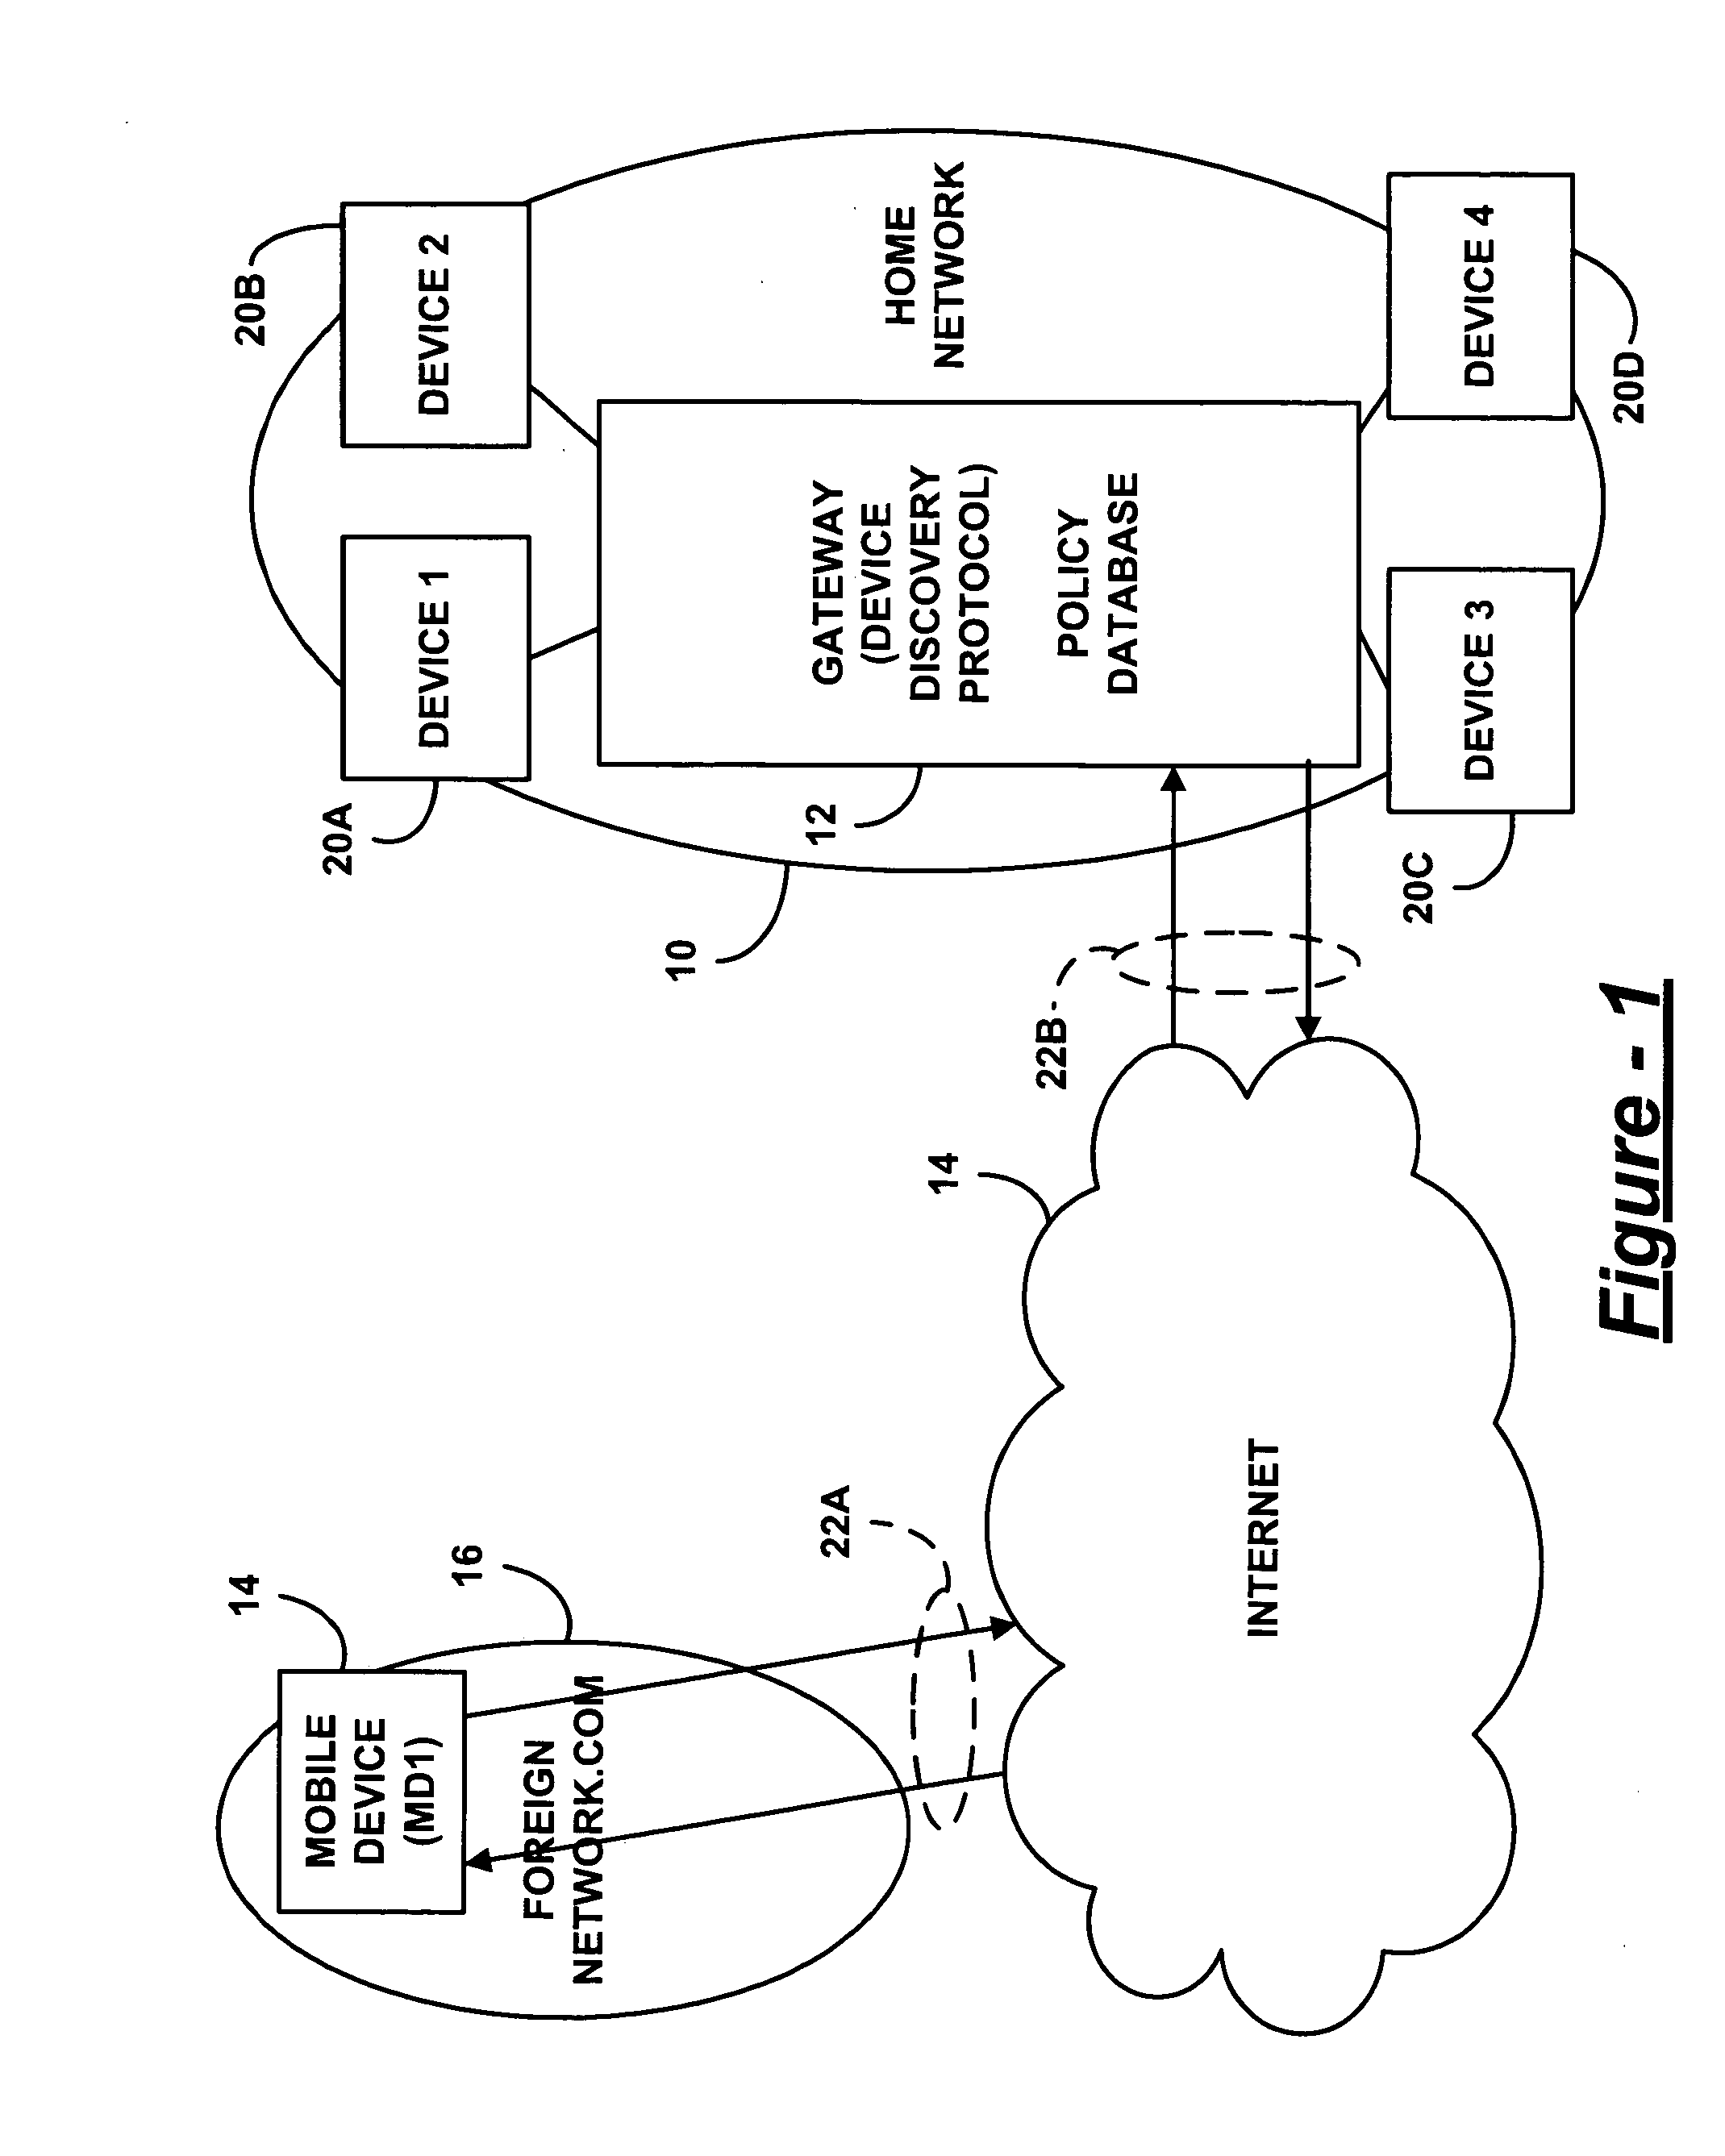 Policy-based device/service discovery and dissemination of device profile and capability information for P2P networking